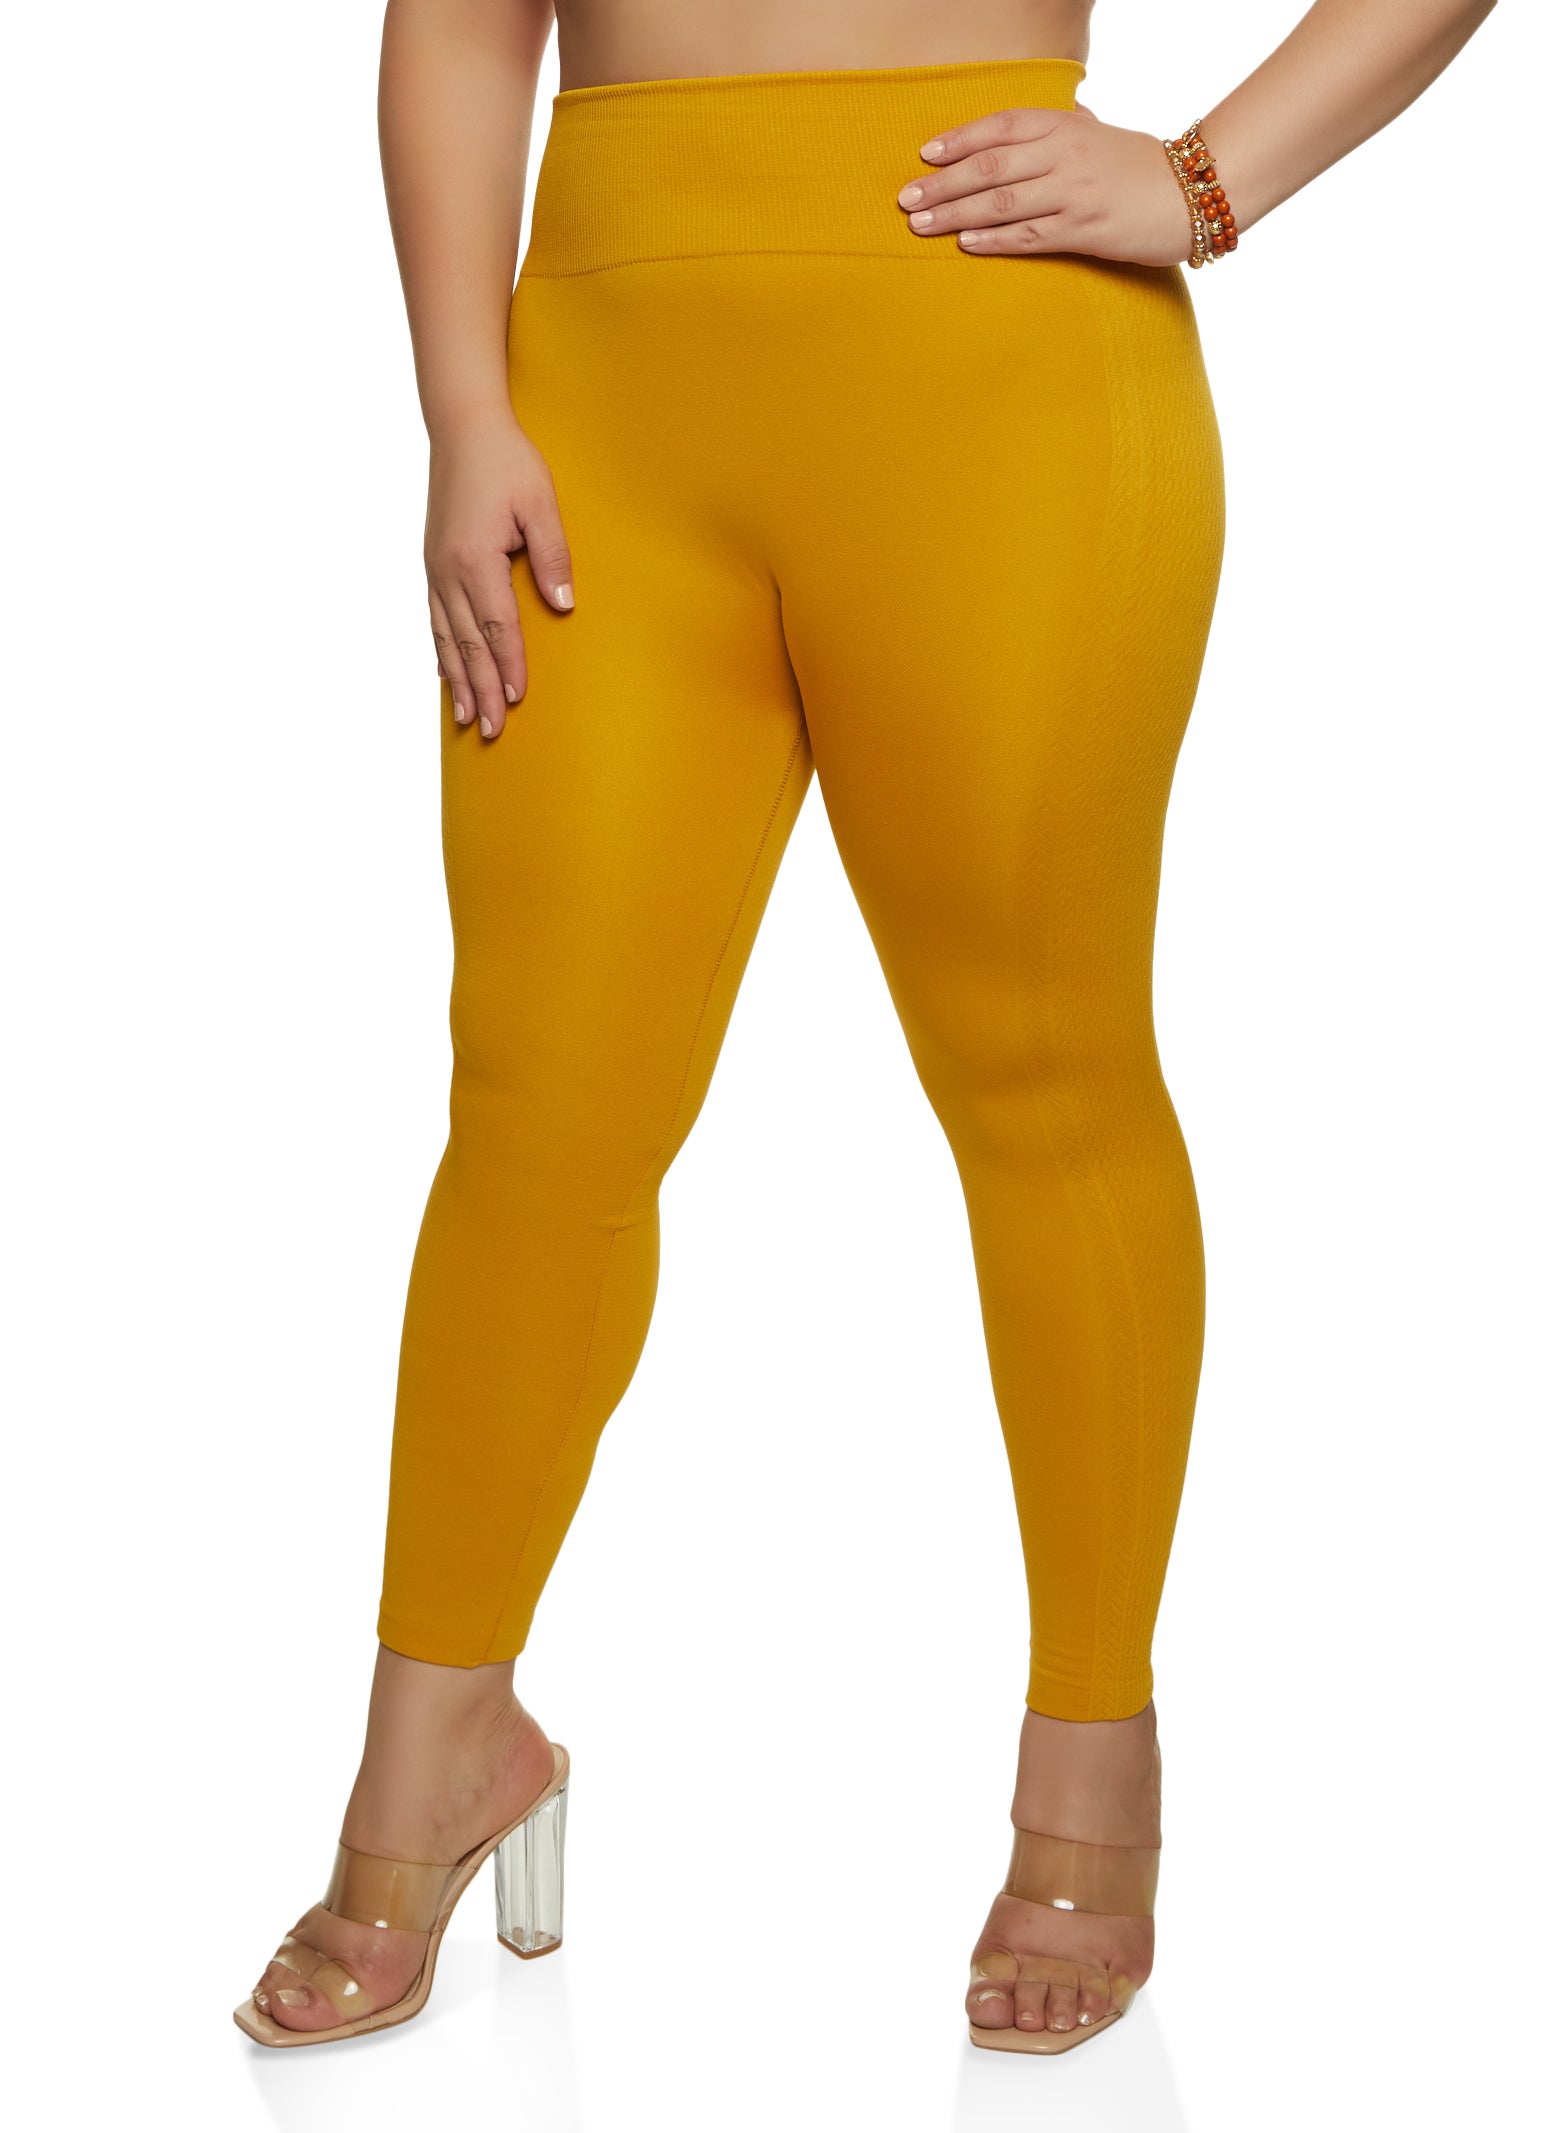 Juicy Fruit High Waist Leggings For Women Plus Size Fitness Pants With Push  Up Effect Candy Color Gym Pants For Women 2021 H1221 From Mengyang10, $6.13